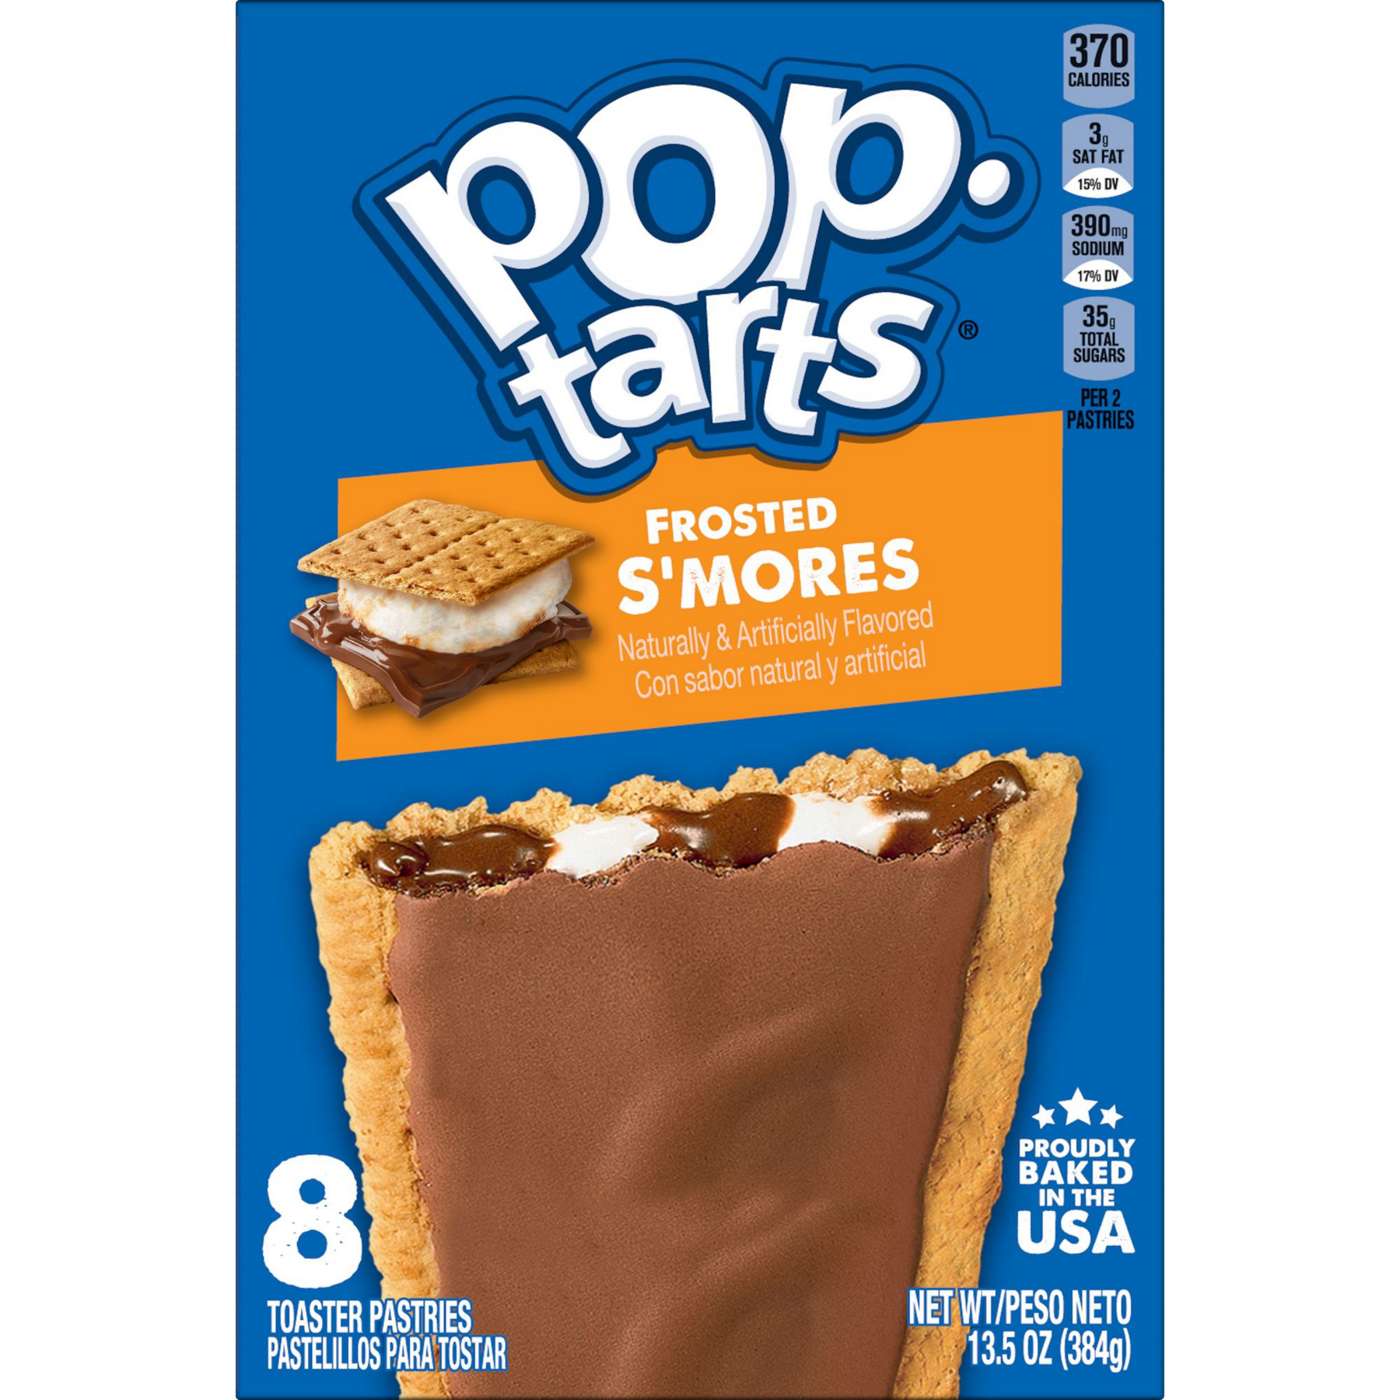 Pop-Tarts Frosted S'mores Toaster Pastries; image 11 of 12